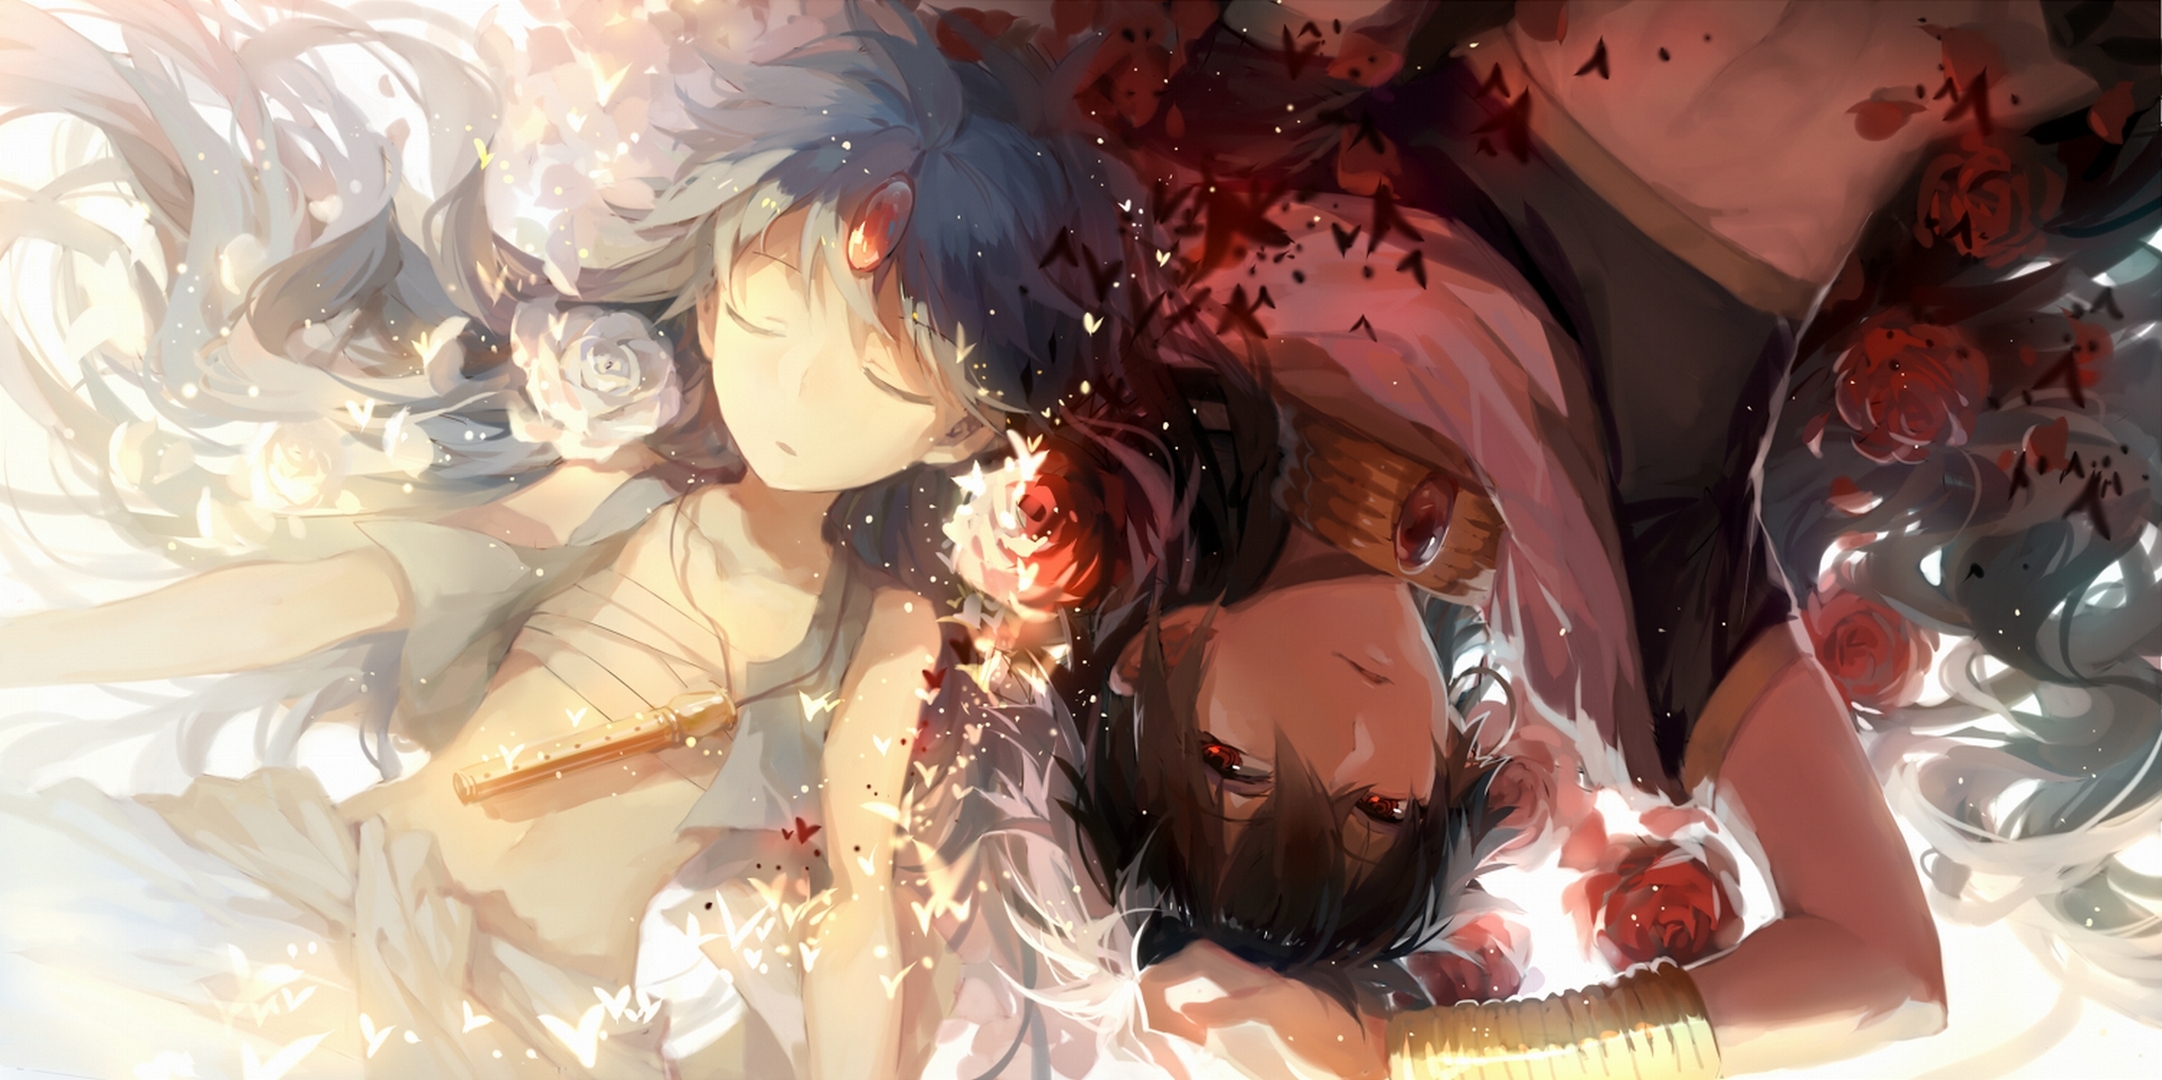 Anime Magi: The Labyrinth Of Magic HD Wallpaper | Background Image